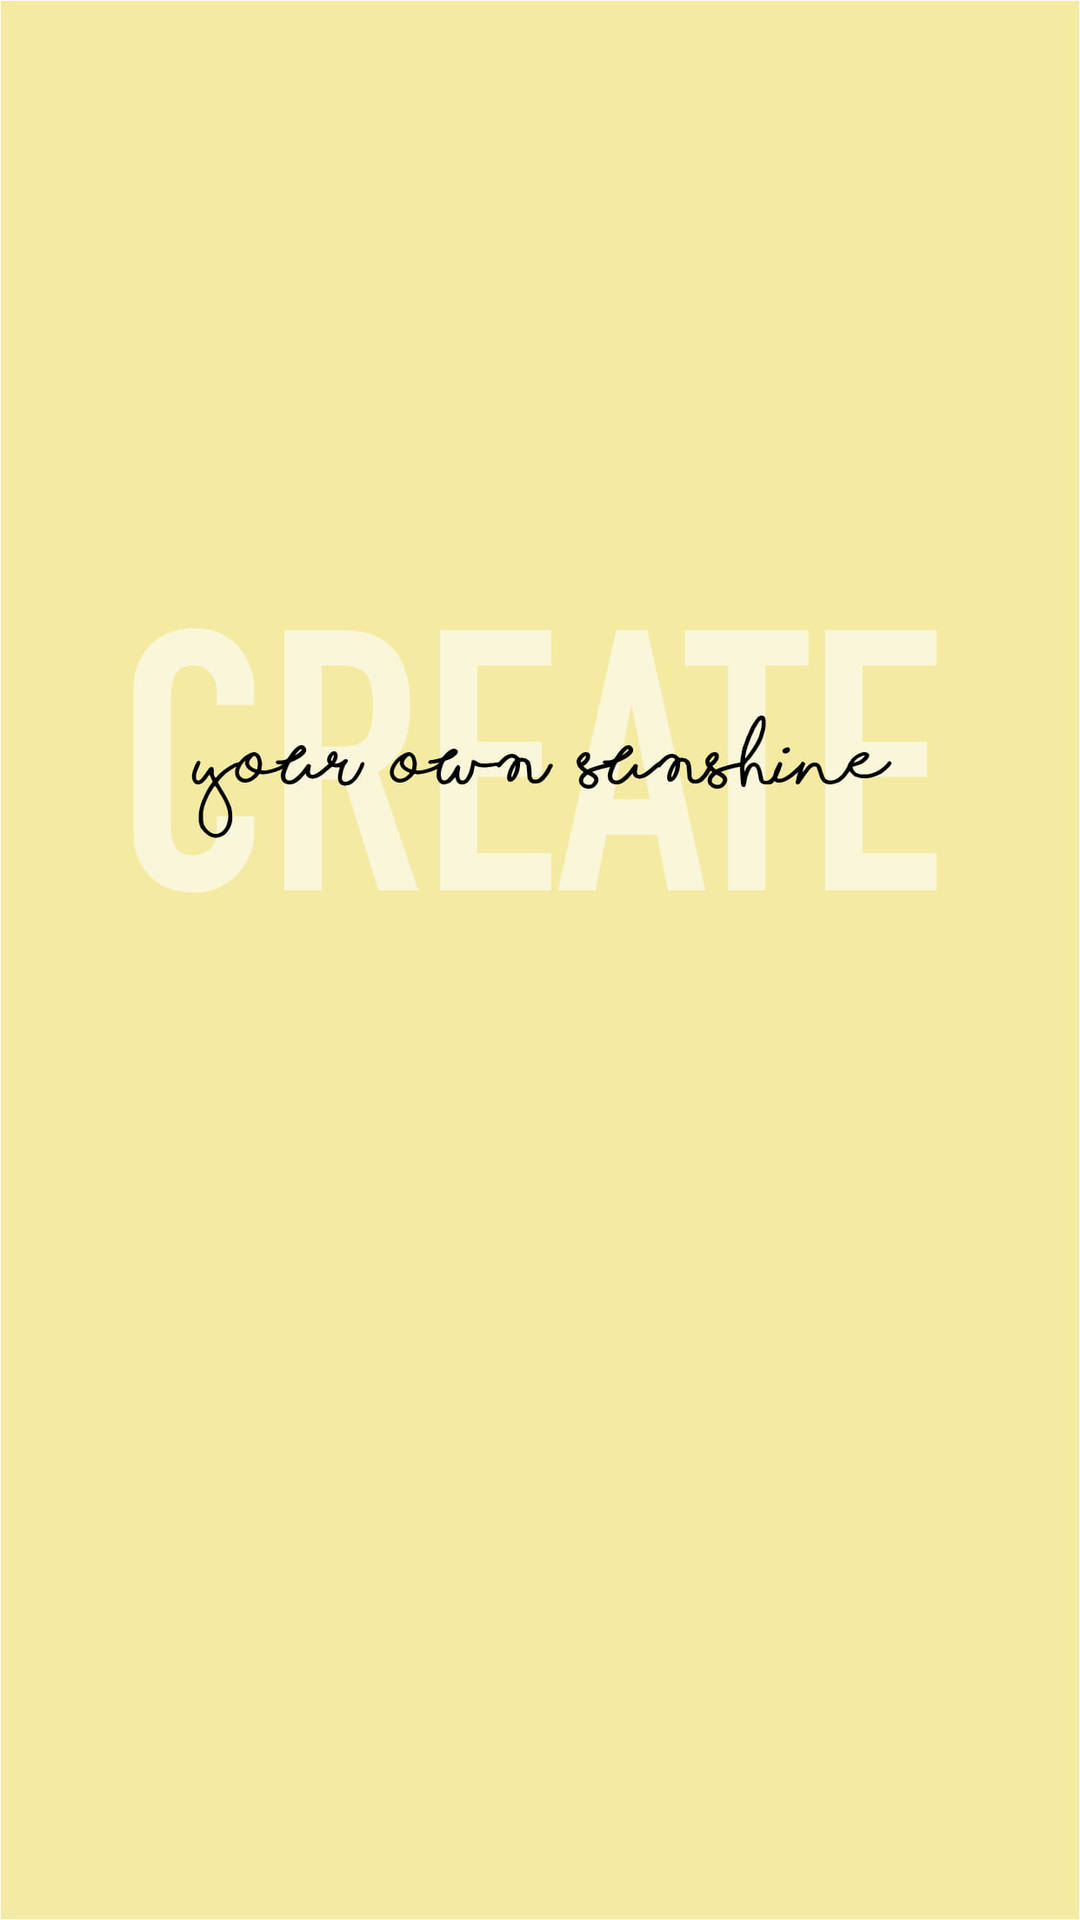 Pastel Yellow Aesthetic With Simple Text Wallpaper